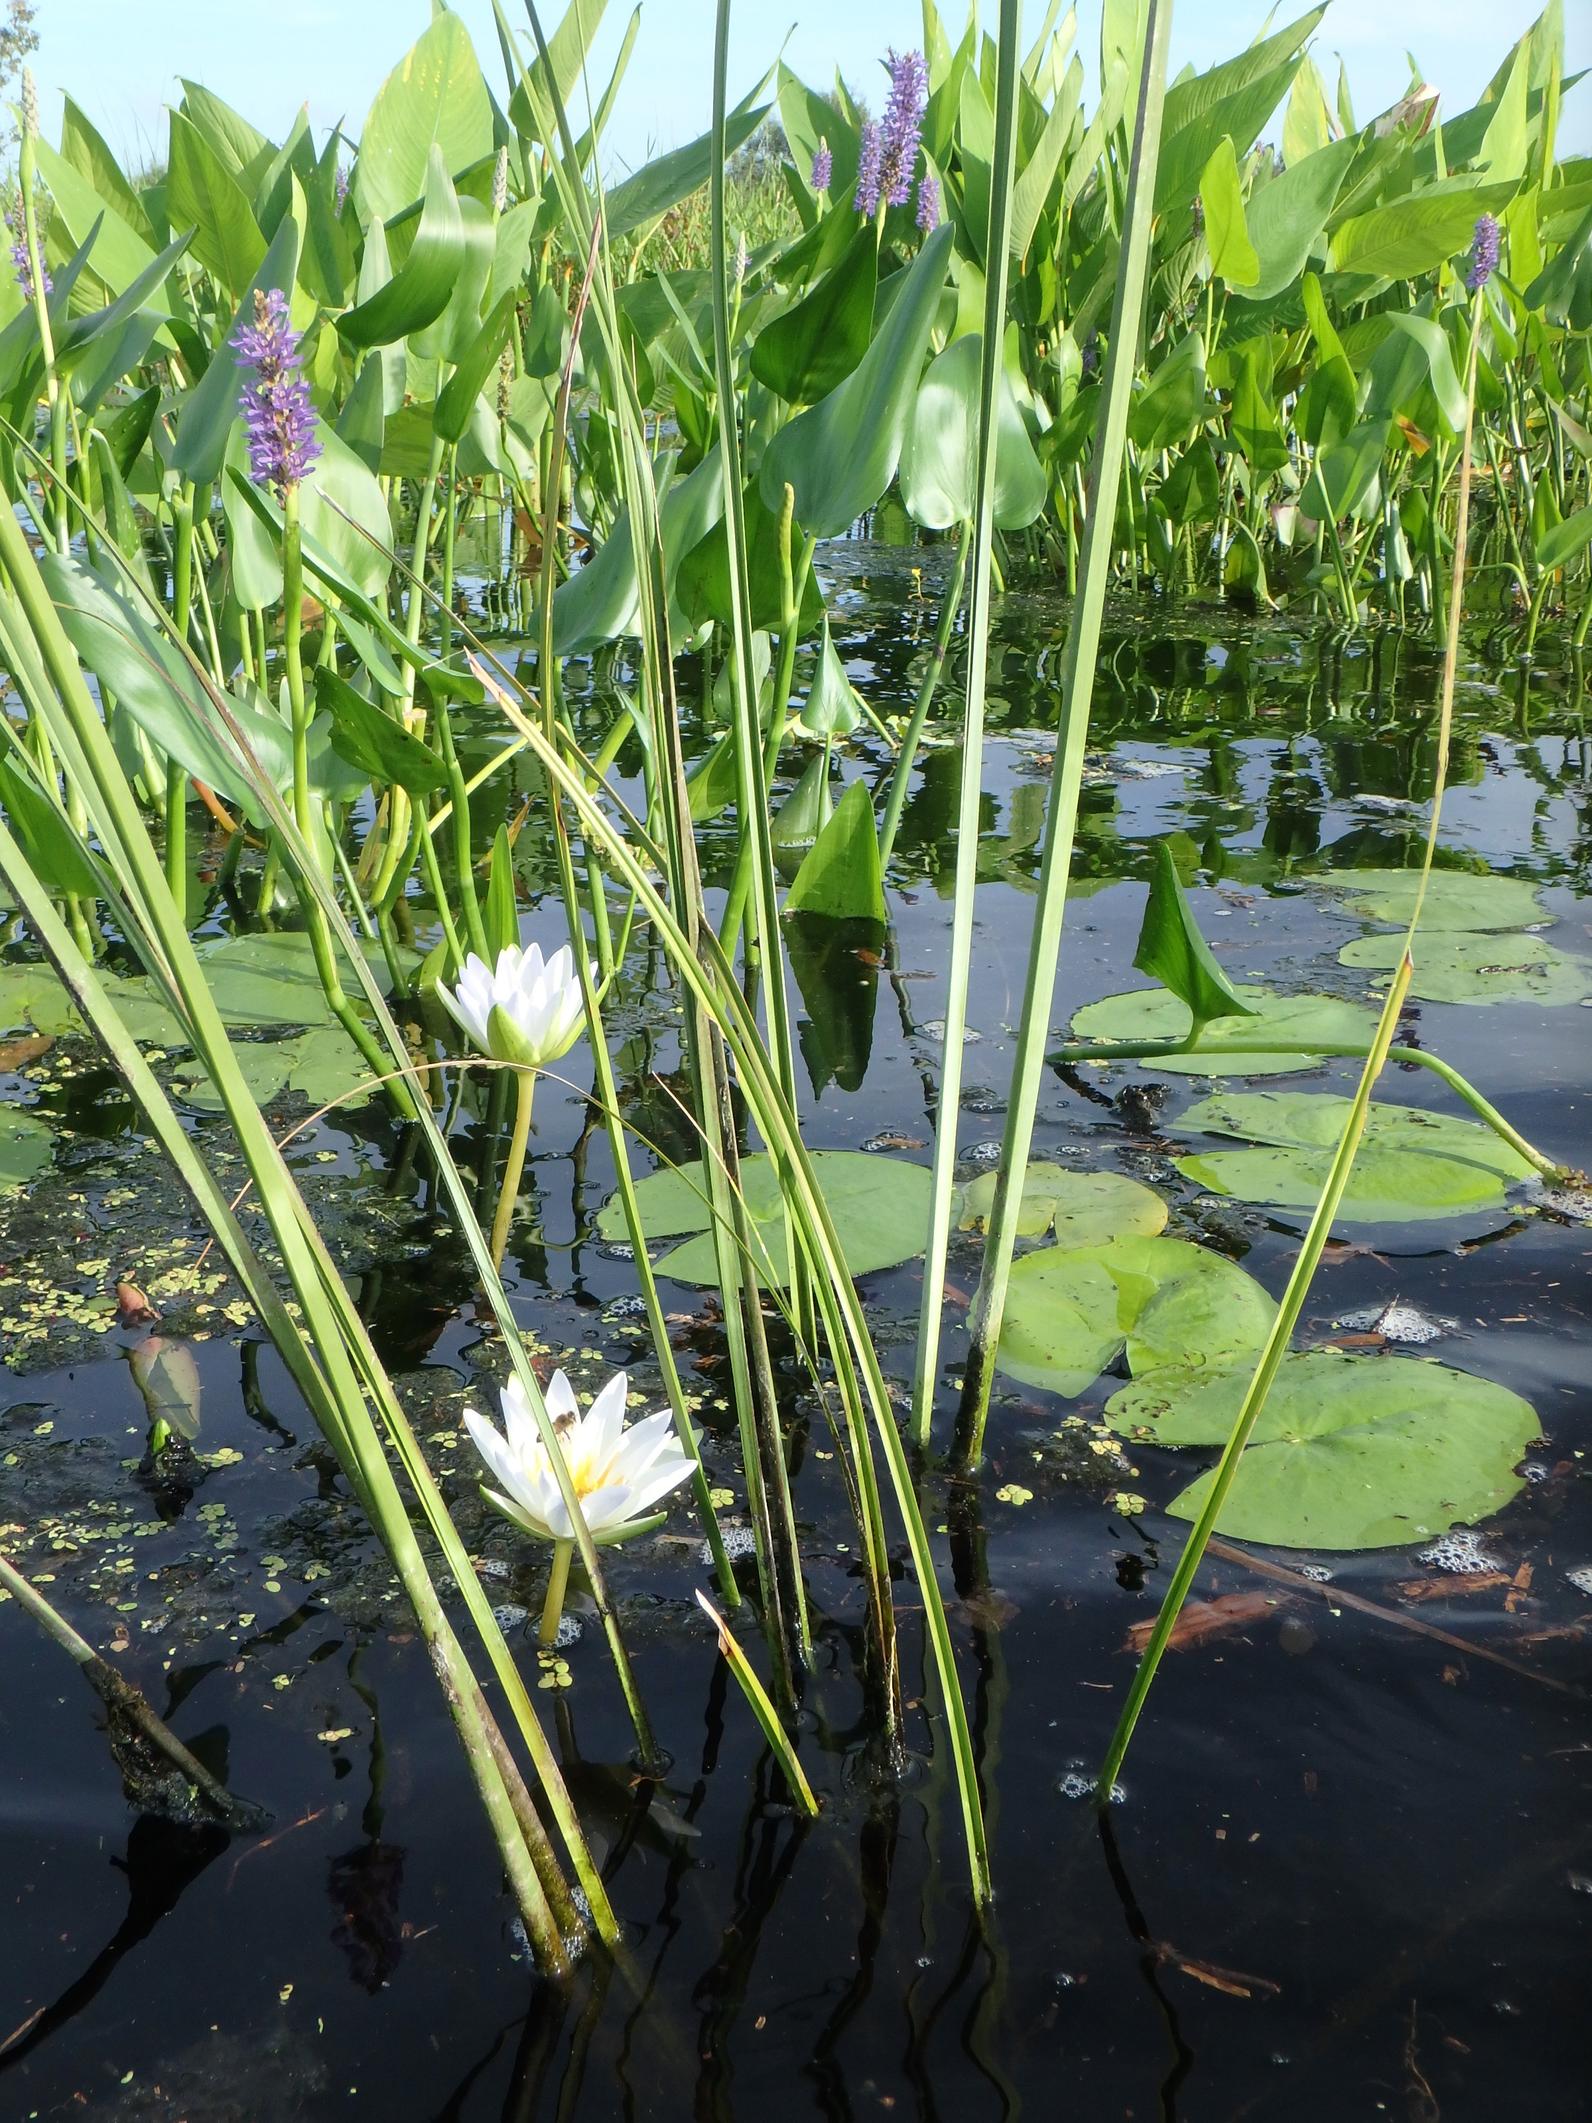 Fragrant water lily, Nymphaea odorata and pickerel weed, Pontederia cordata, flowers were in bloom throughout the marsh restoration site.  The large leaves of alligator flag Thalia geniculata, (in the background of the photo) emerged in clumps across the 